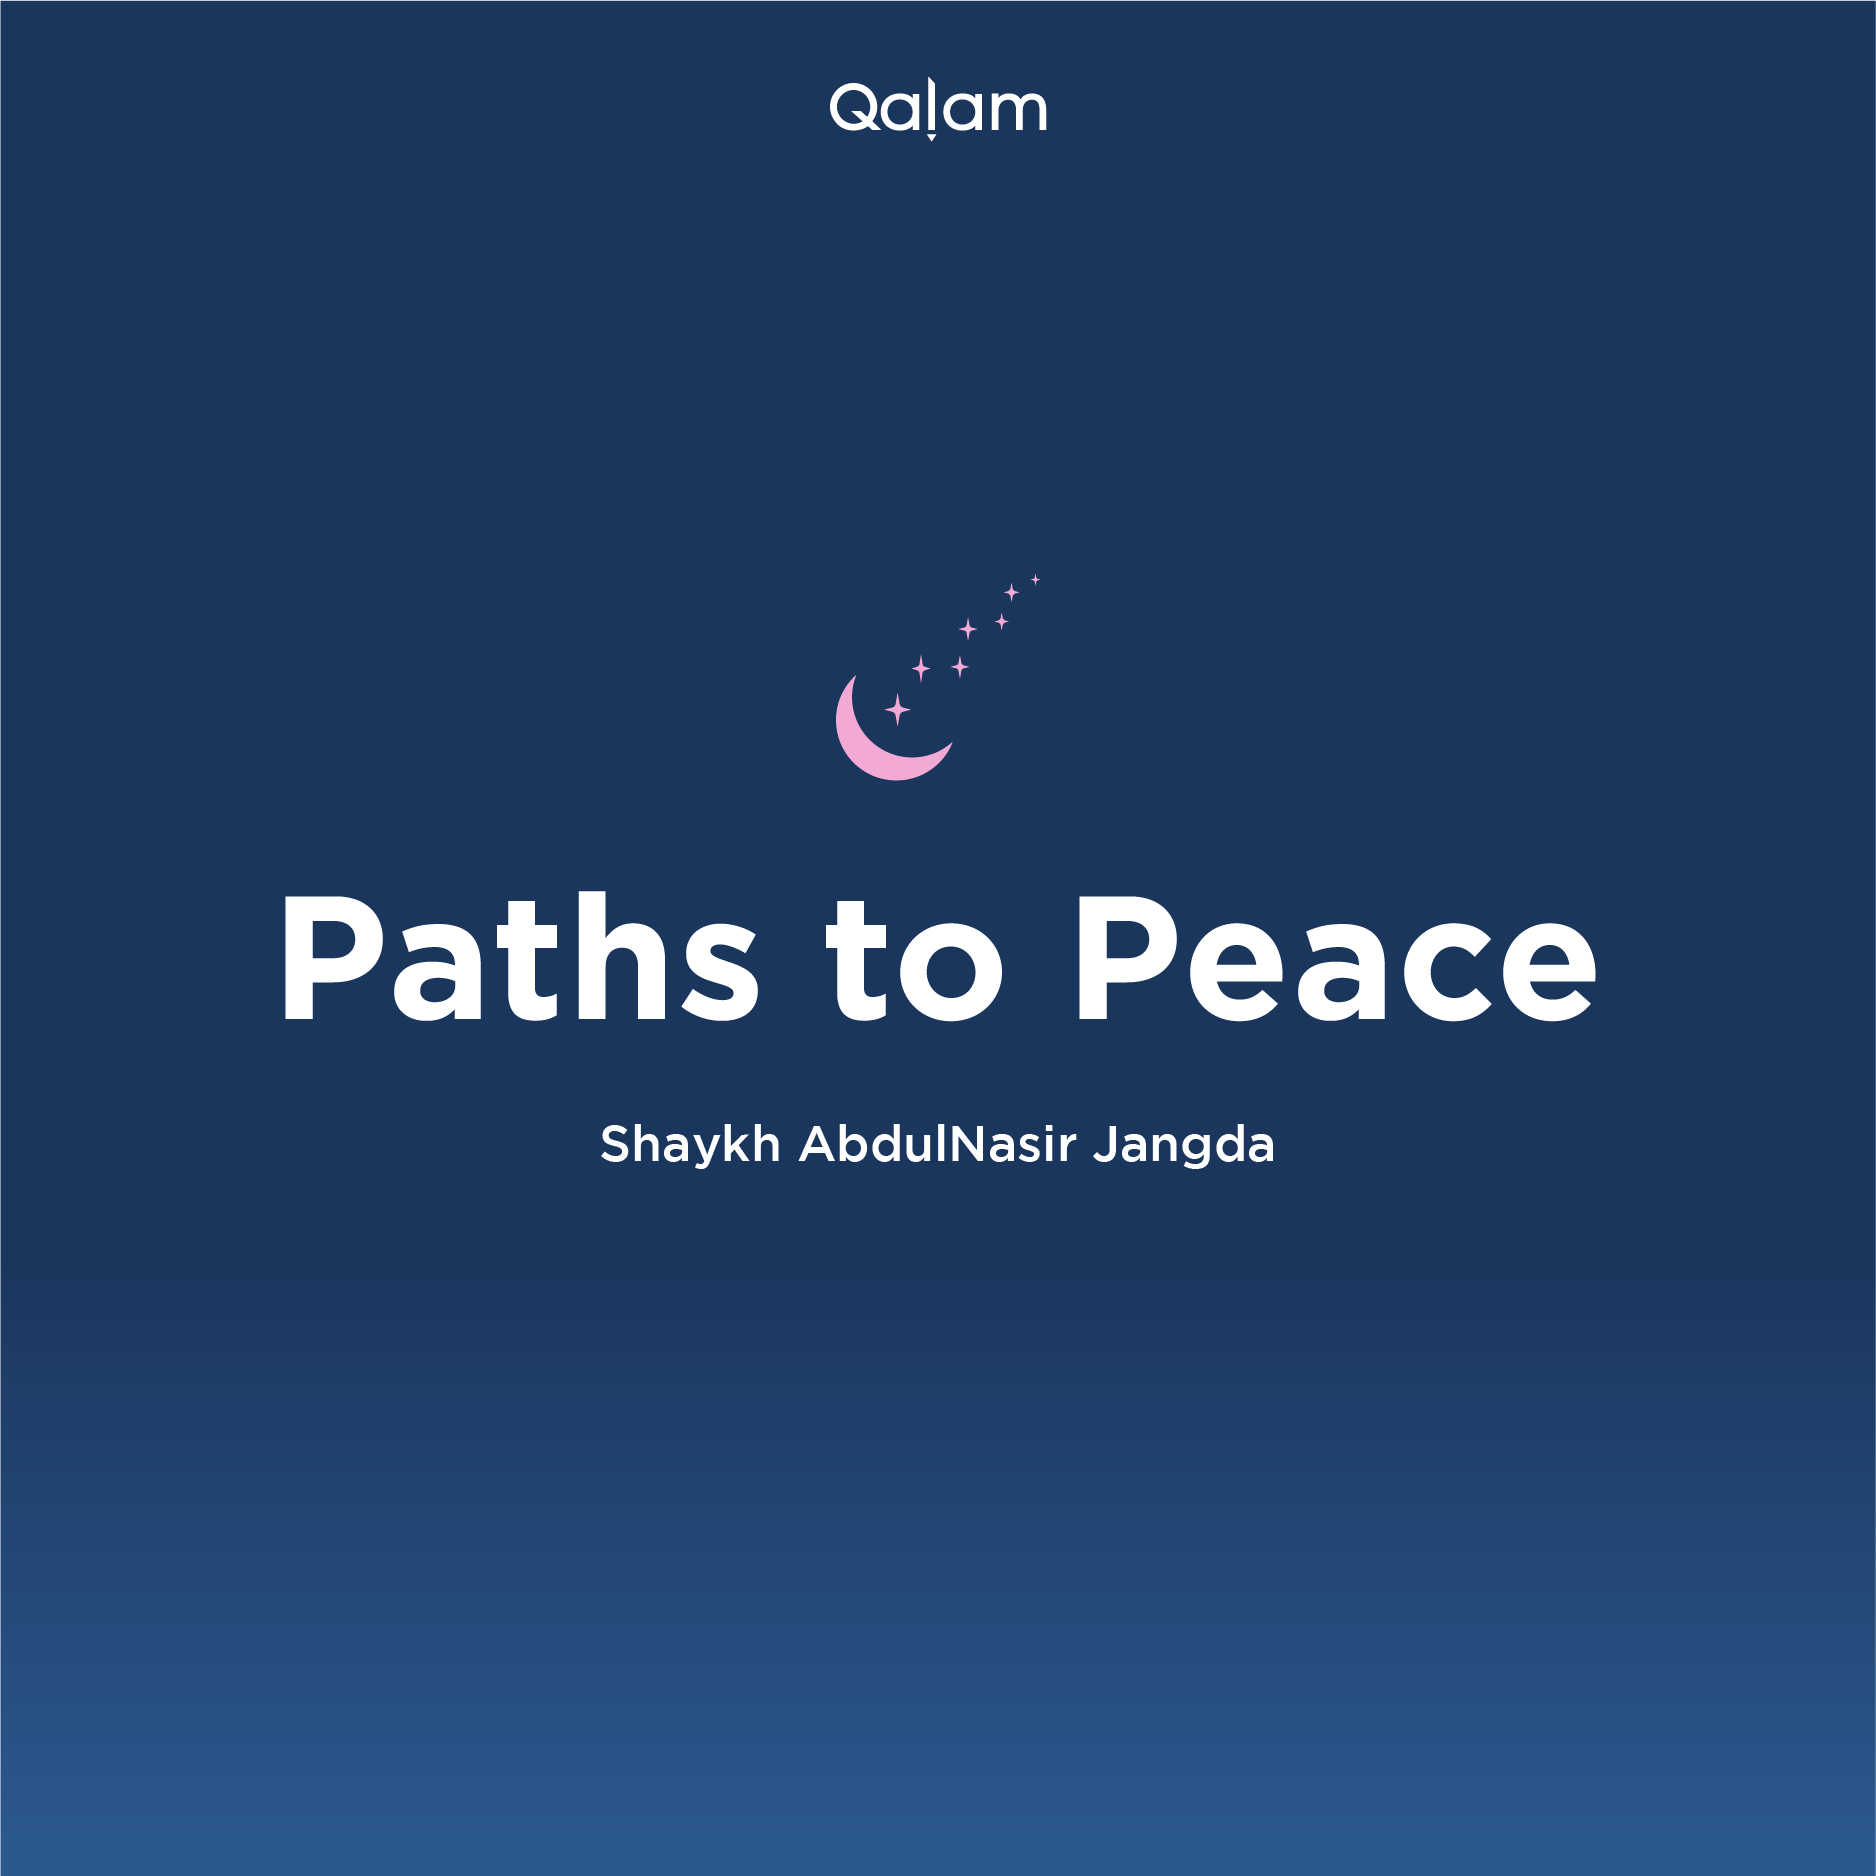 Paths to Peace: EP14